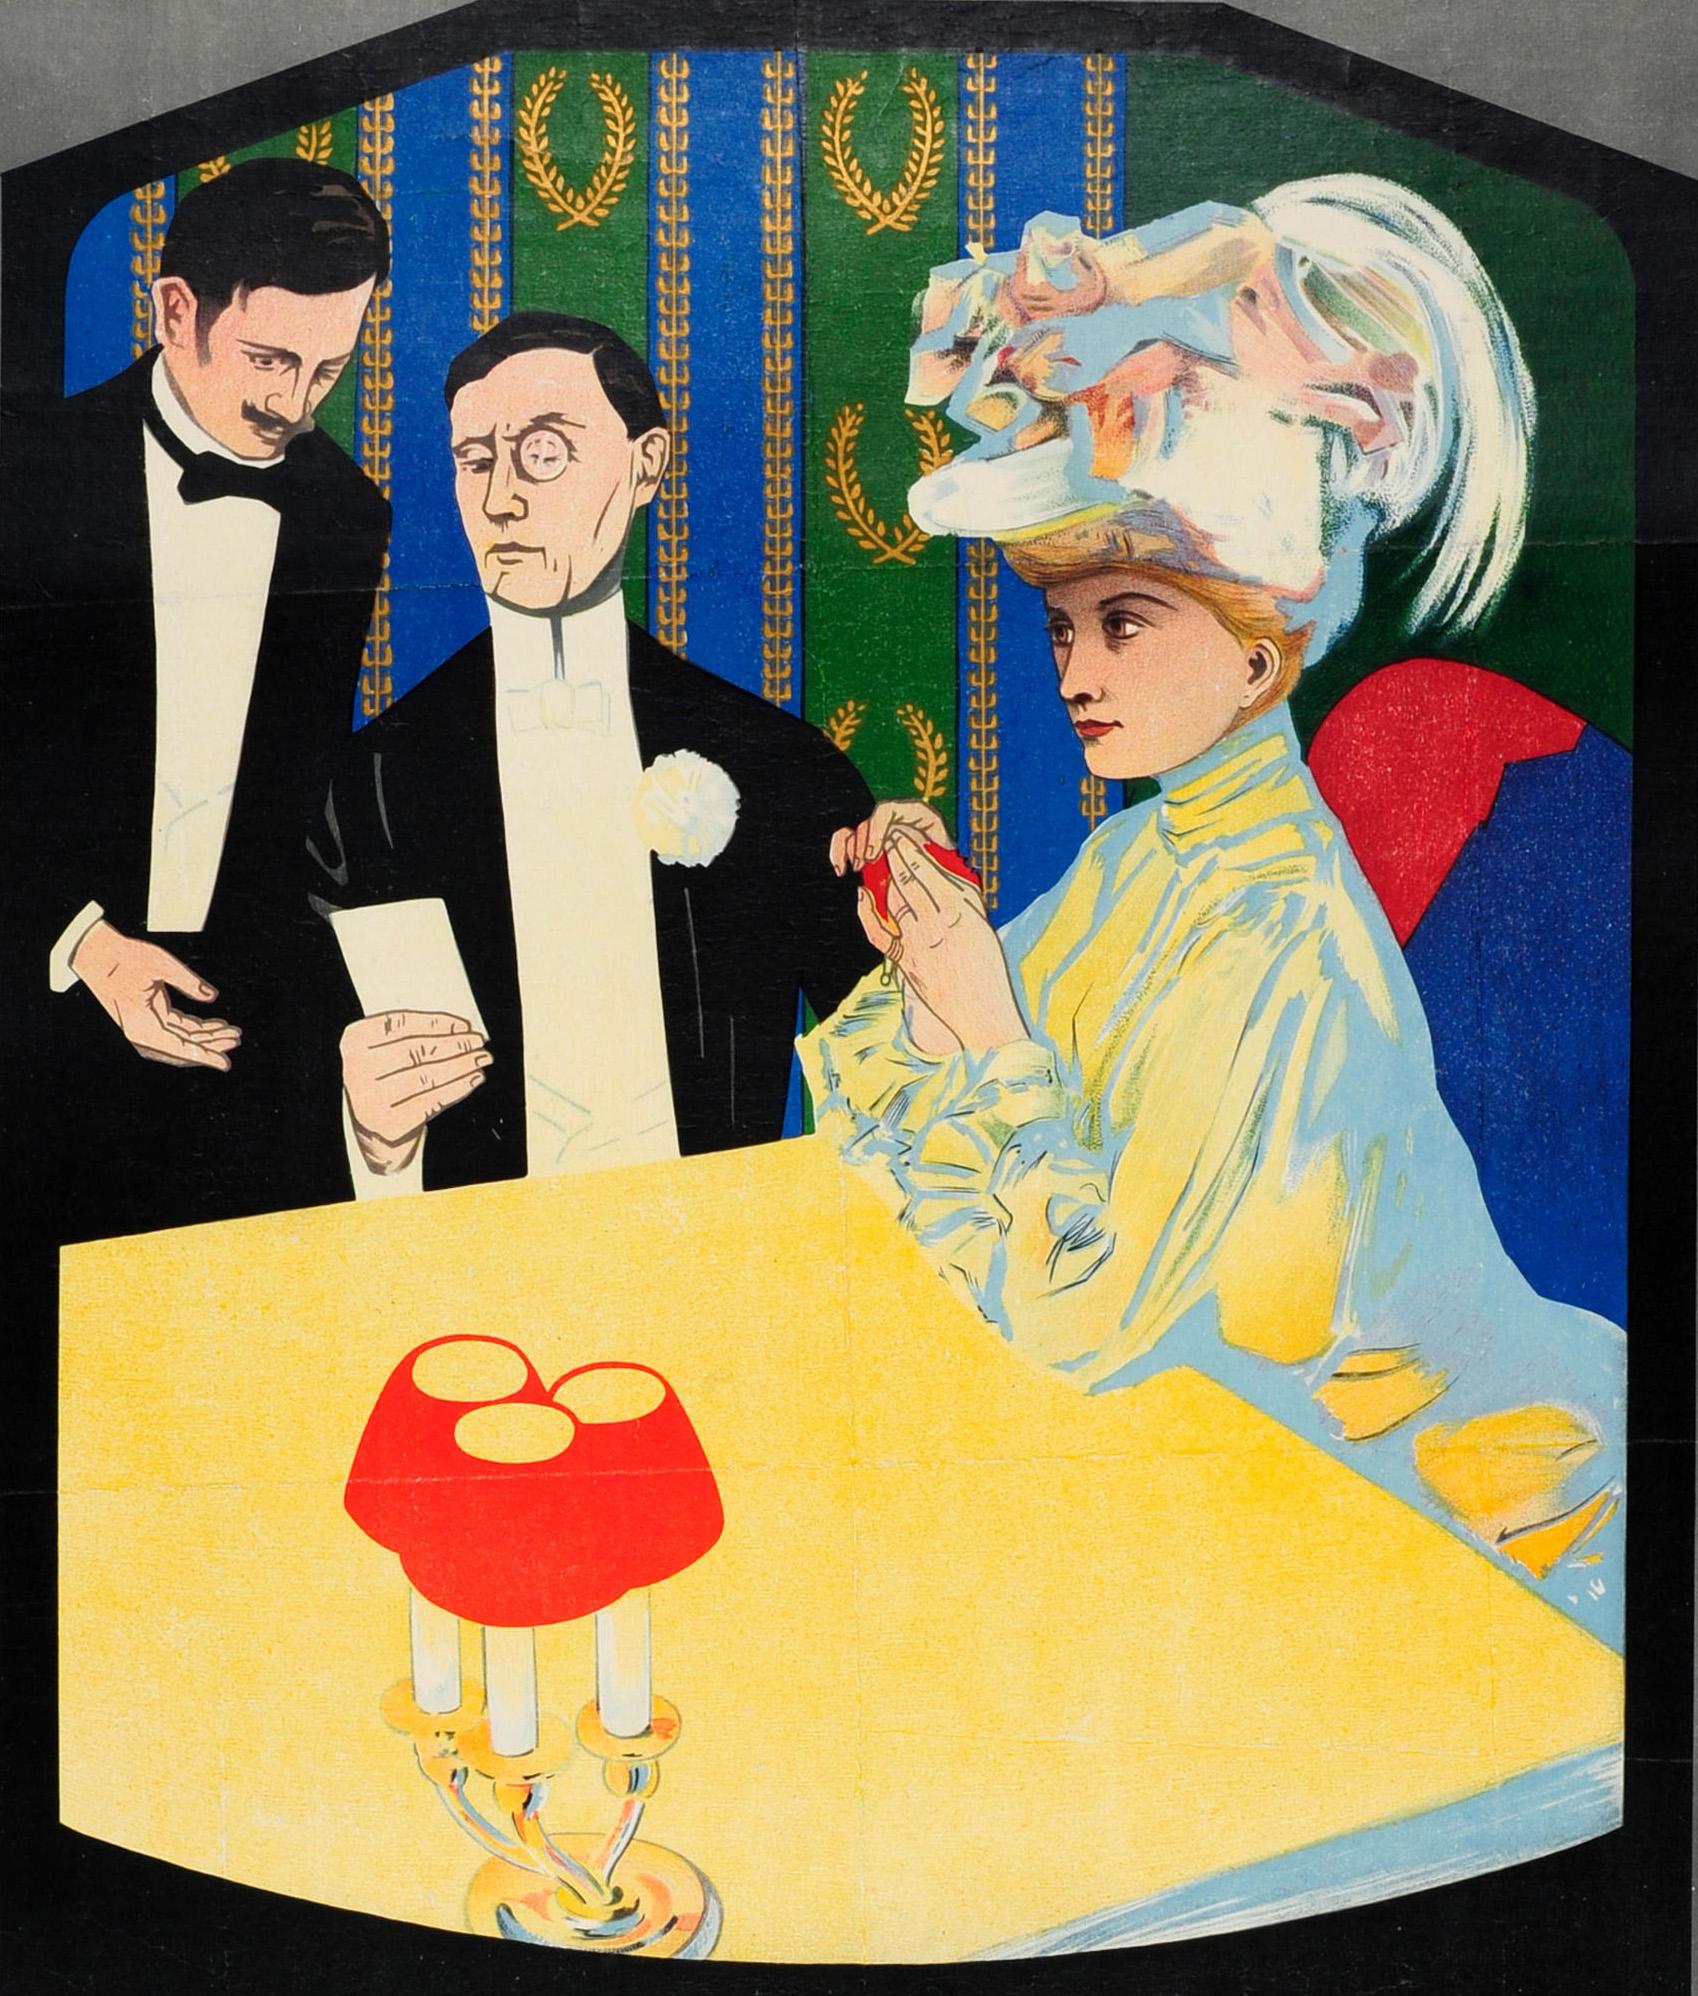 Original antique poster for a dinner concert at the Savoy Bar in Munich depicting two men in smart evening suits looking at a piece of paper, the seated gentleman wearing a monocle eye glass, and a fashionably dressed lady in a flowing dress and hat